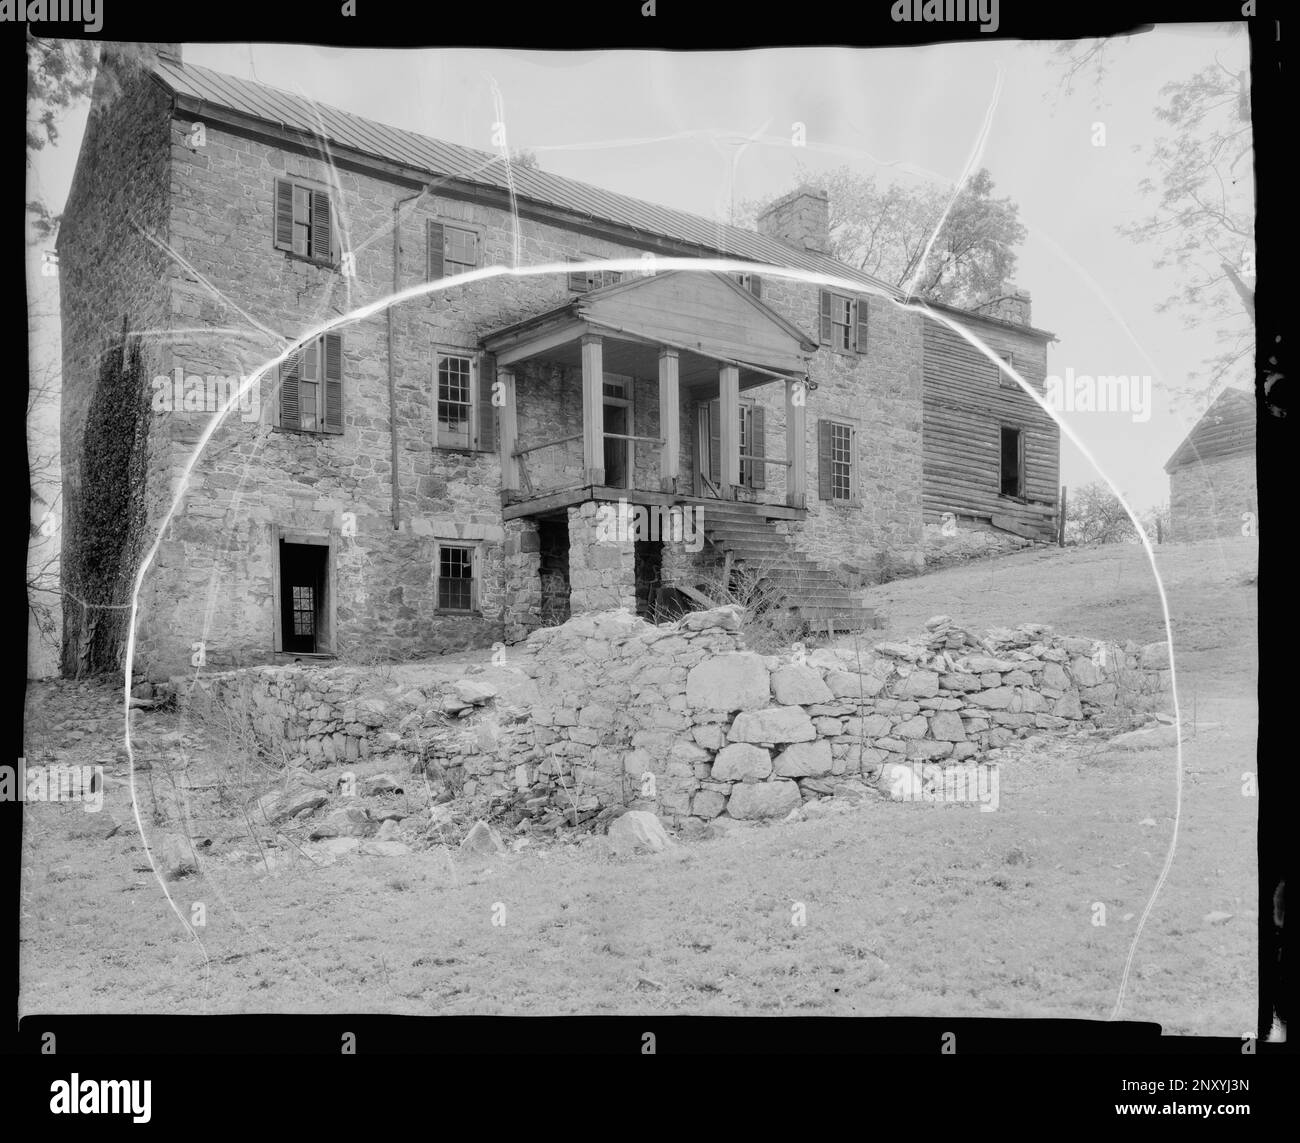 Stone House and Quarters, Berryville vic., Clarke County, Virginia. Carnegie Survey of the Architecture of the South. United States  Virginia  Clarke County  Berryville vic, Porches, Stone walls, Ruins, Stone buildings, Houses. Stock Photo